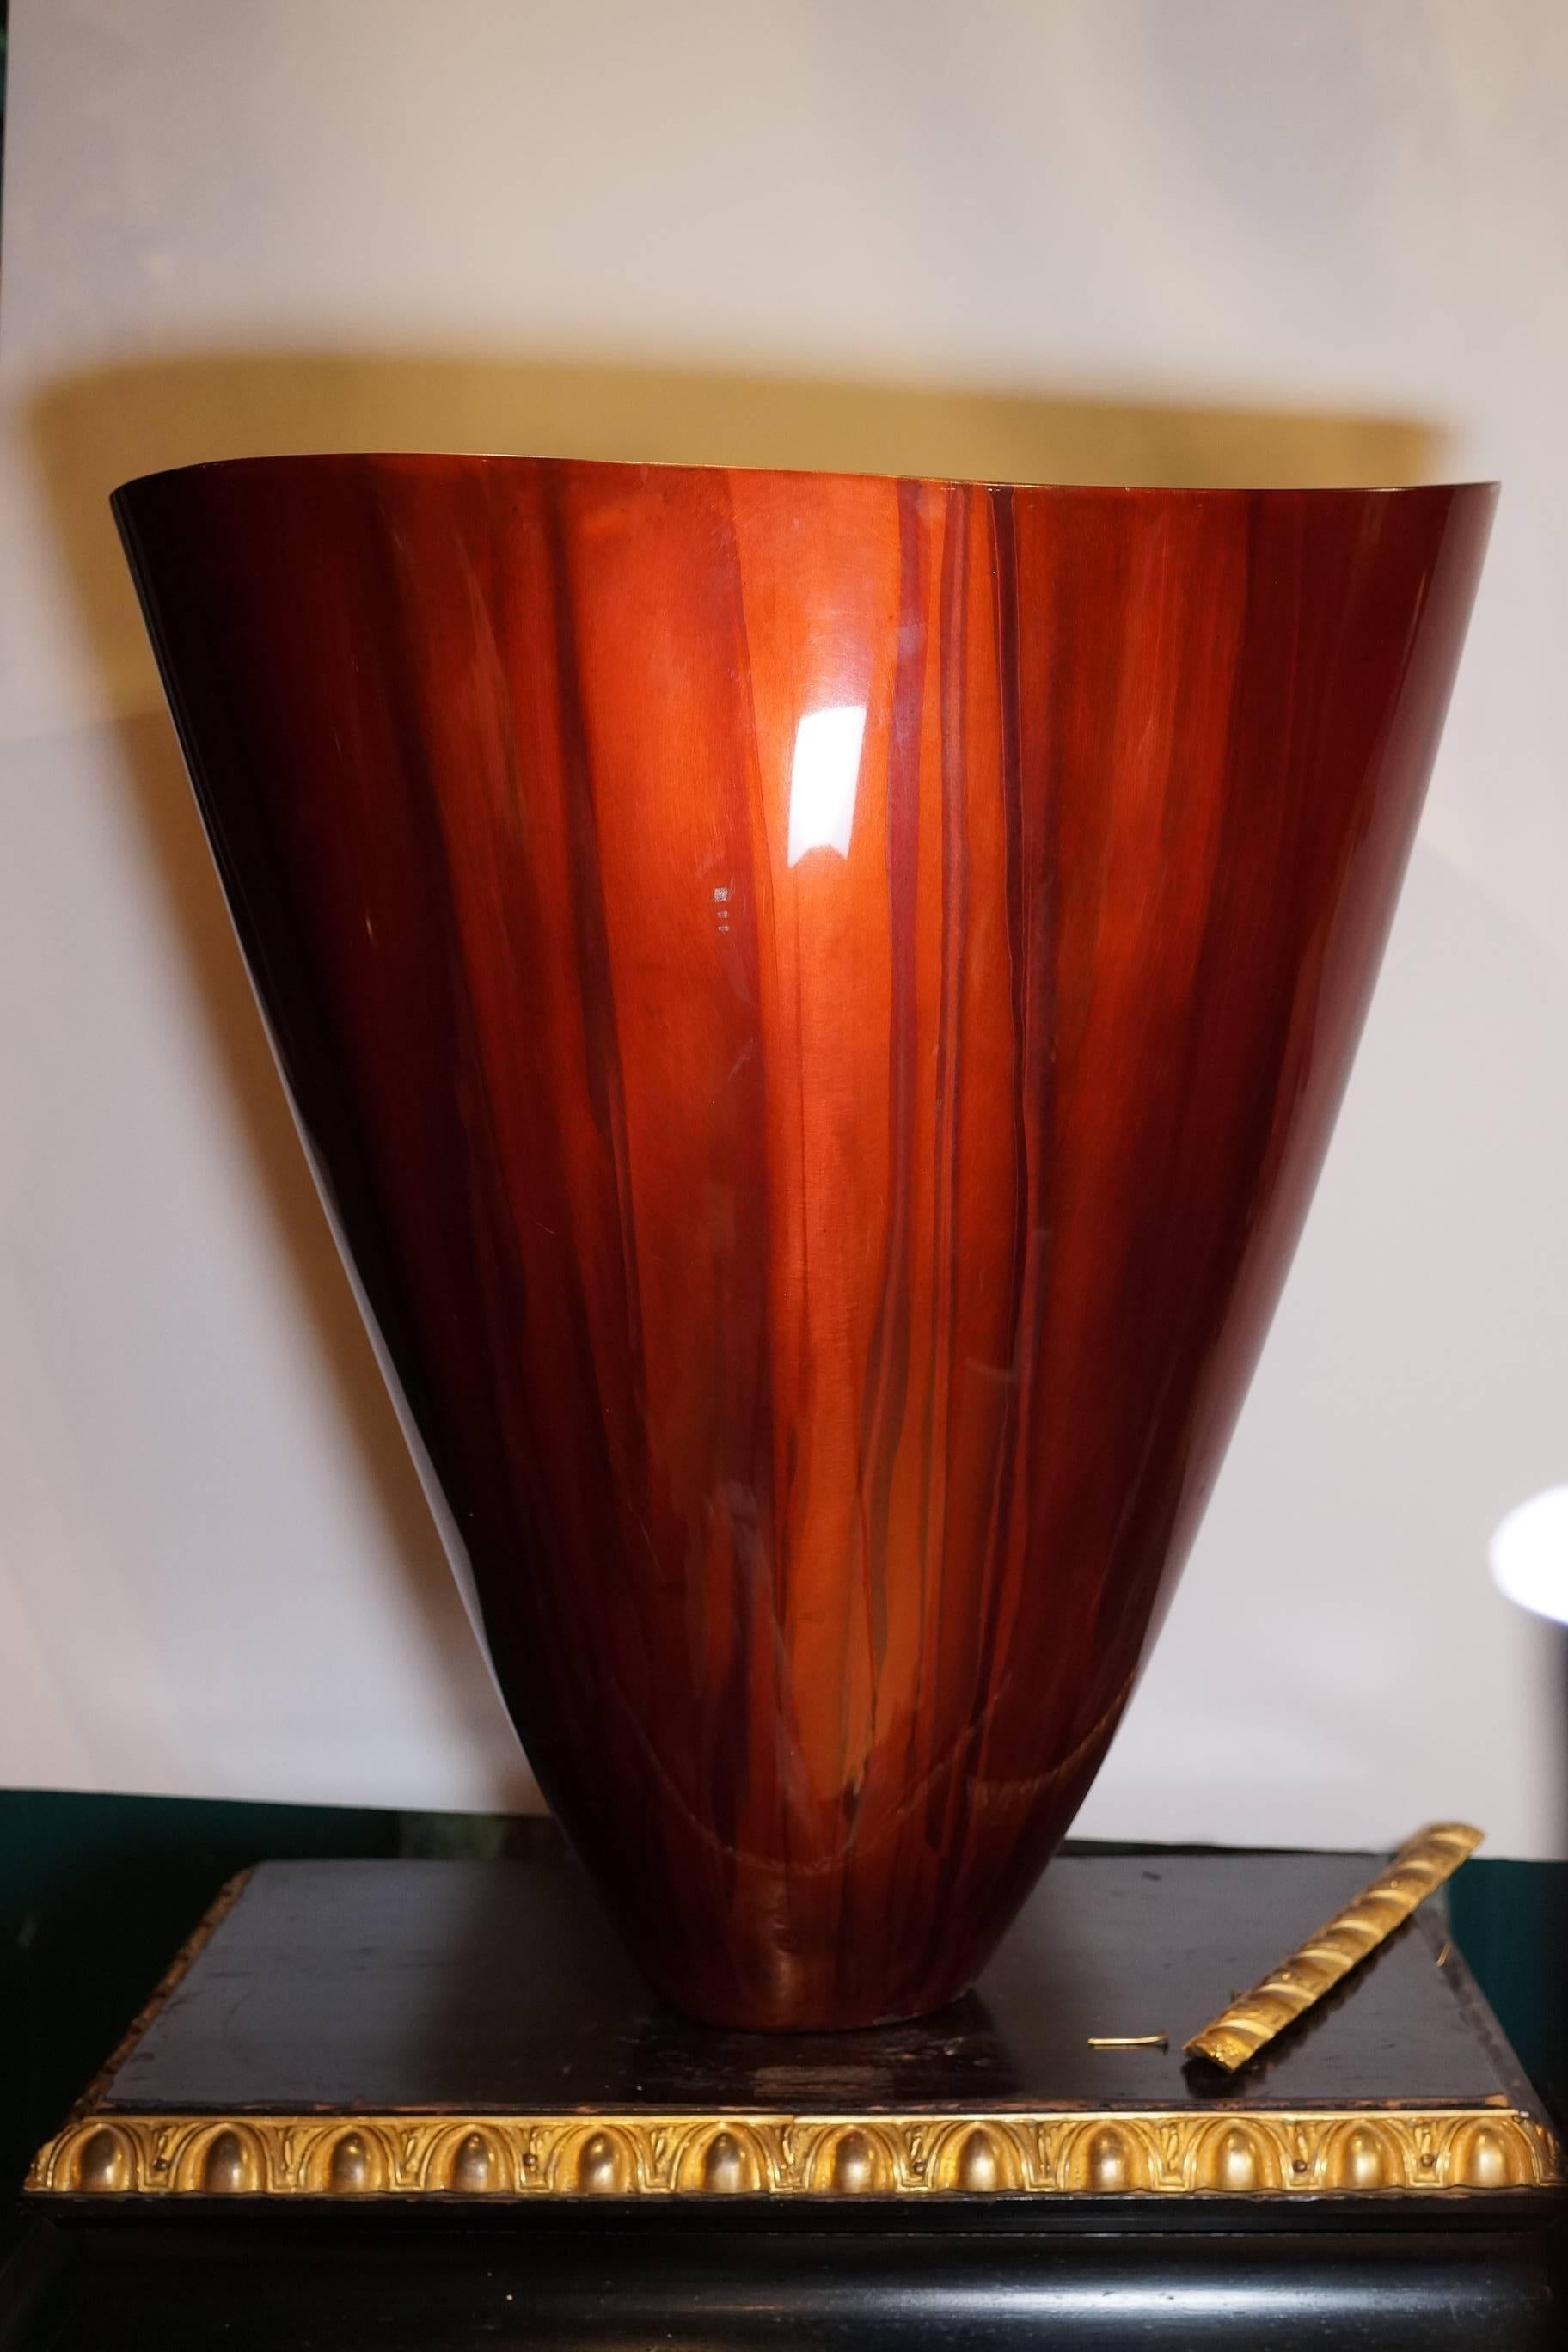 A very unusual contemporary red enameled bronze vase.
Signed at the bottom Daniel? 3/5 1990
Very heavy.
Has an amazing presence and look.